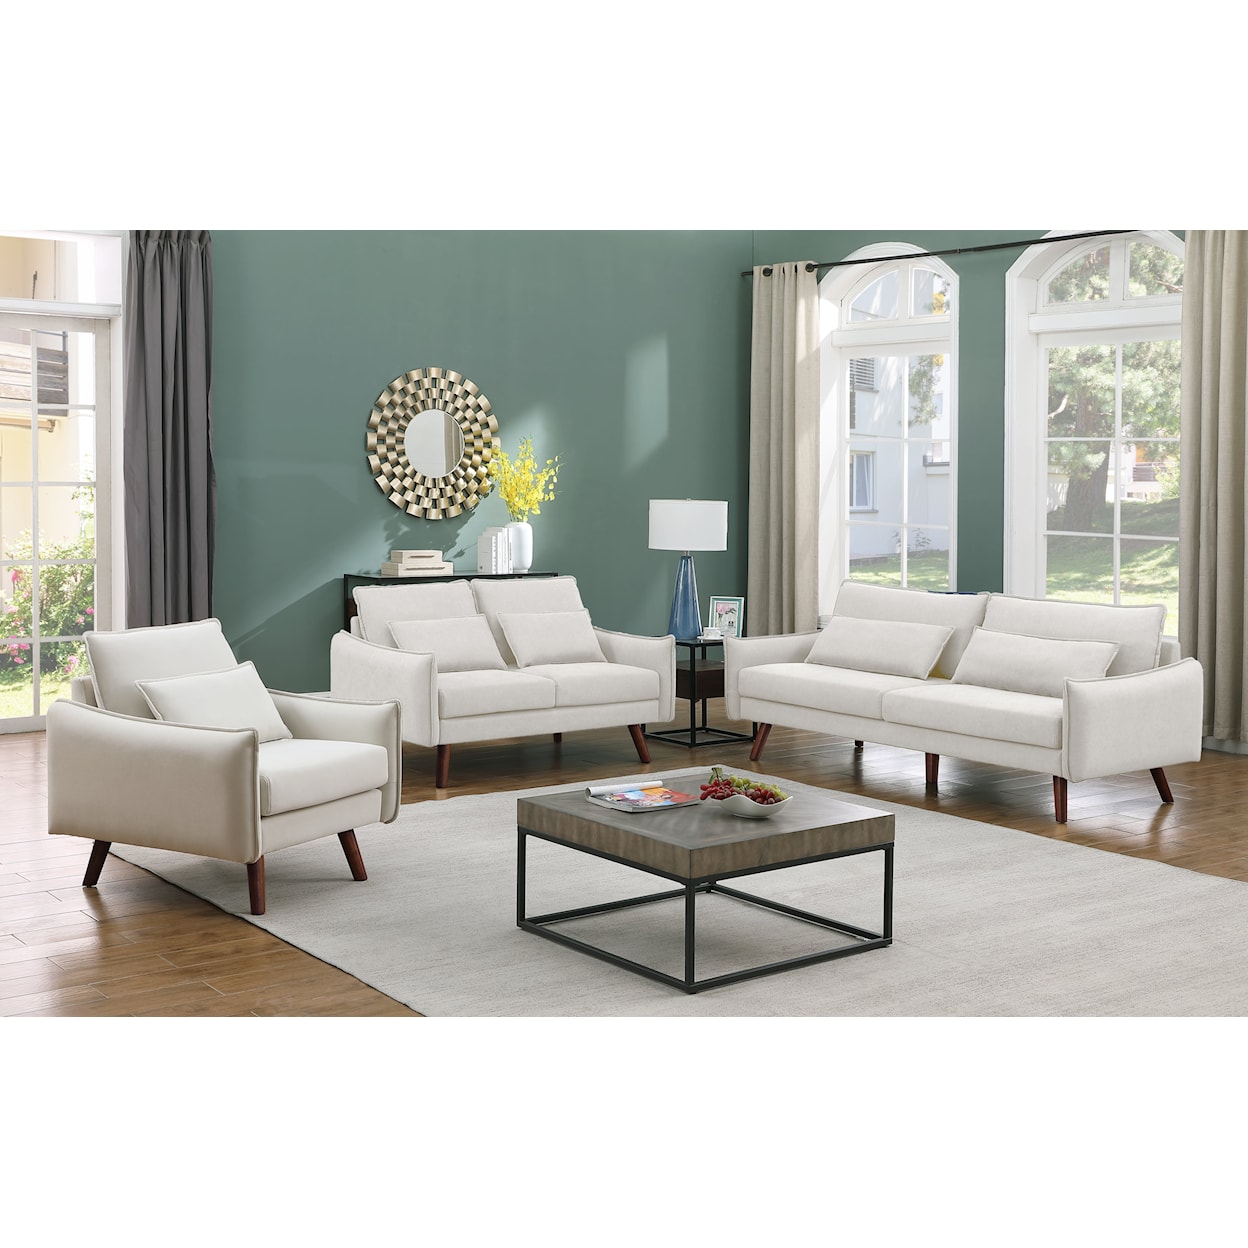 New Classic Furniture Connery Mid-Century Modern Living Room Set